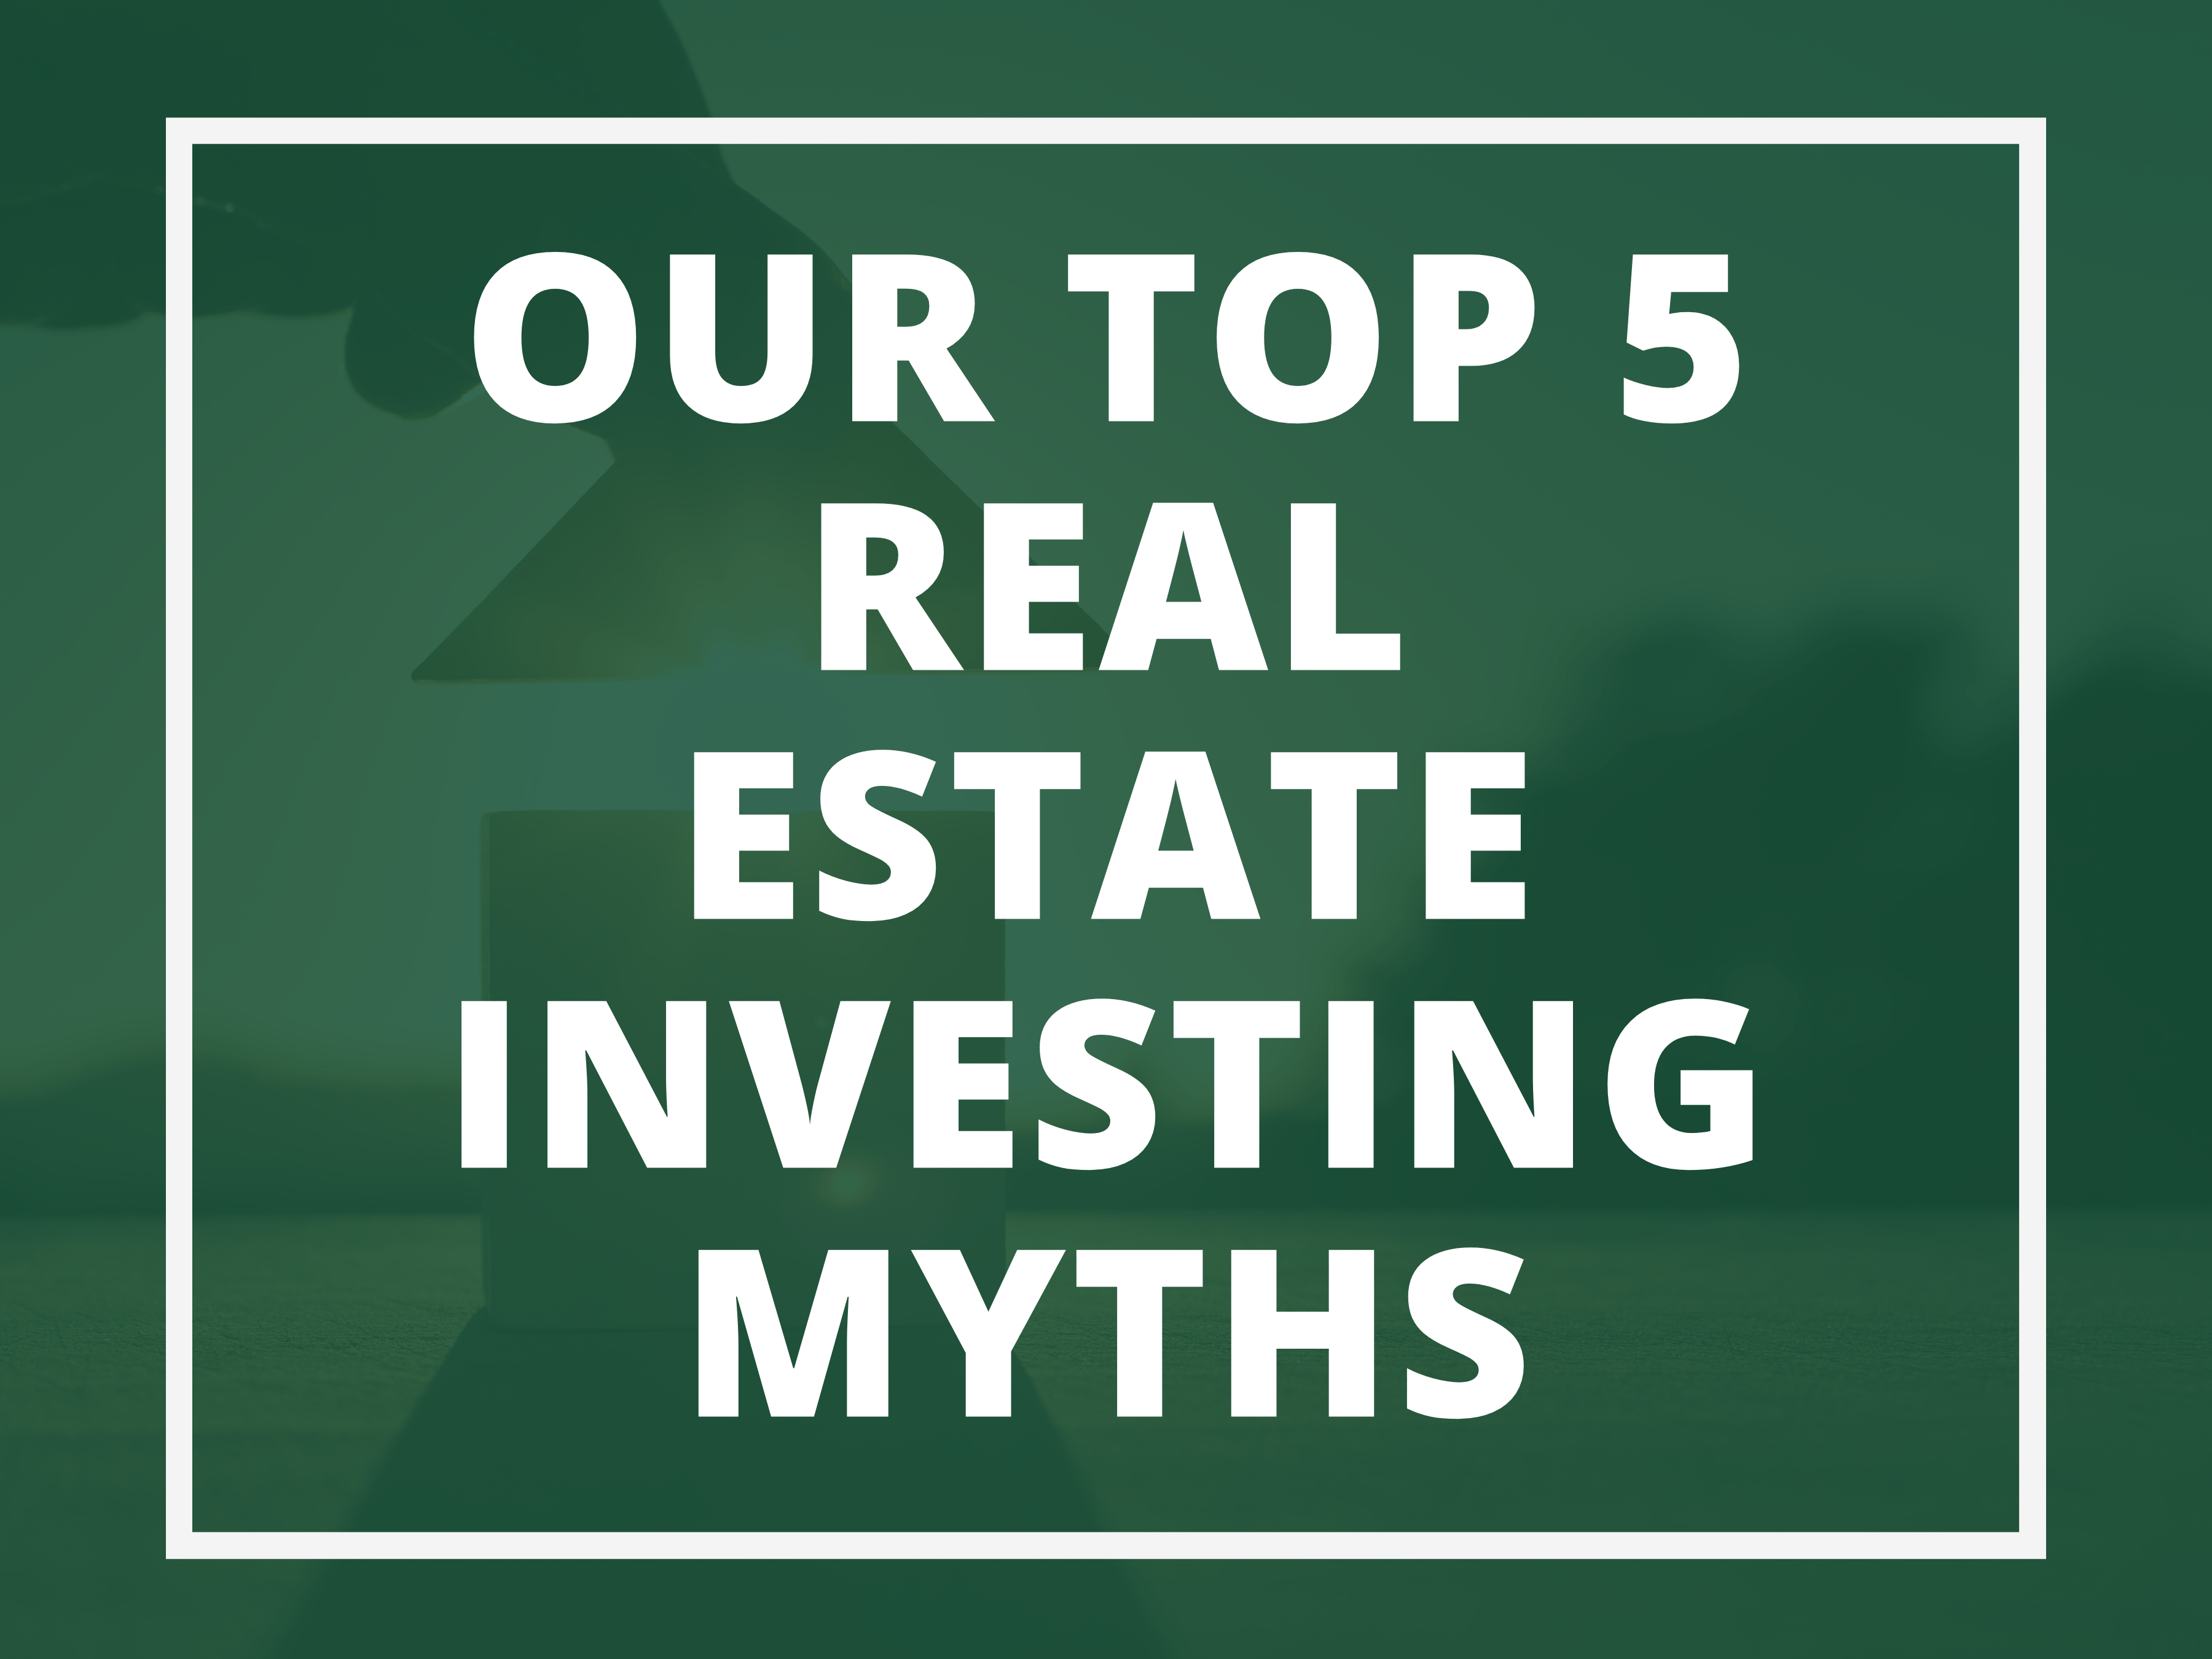 Our Top 5 Real Estate Investing Myths